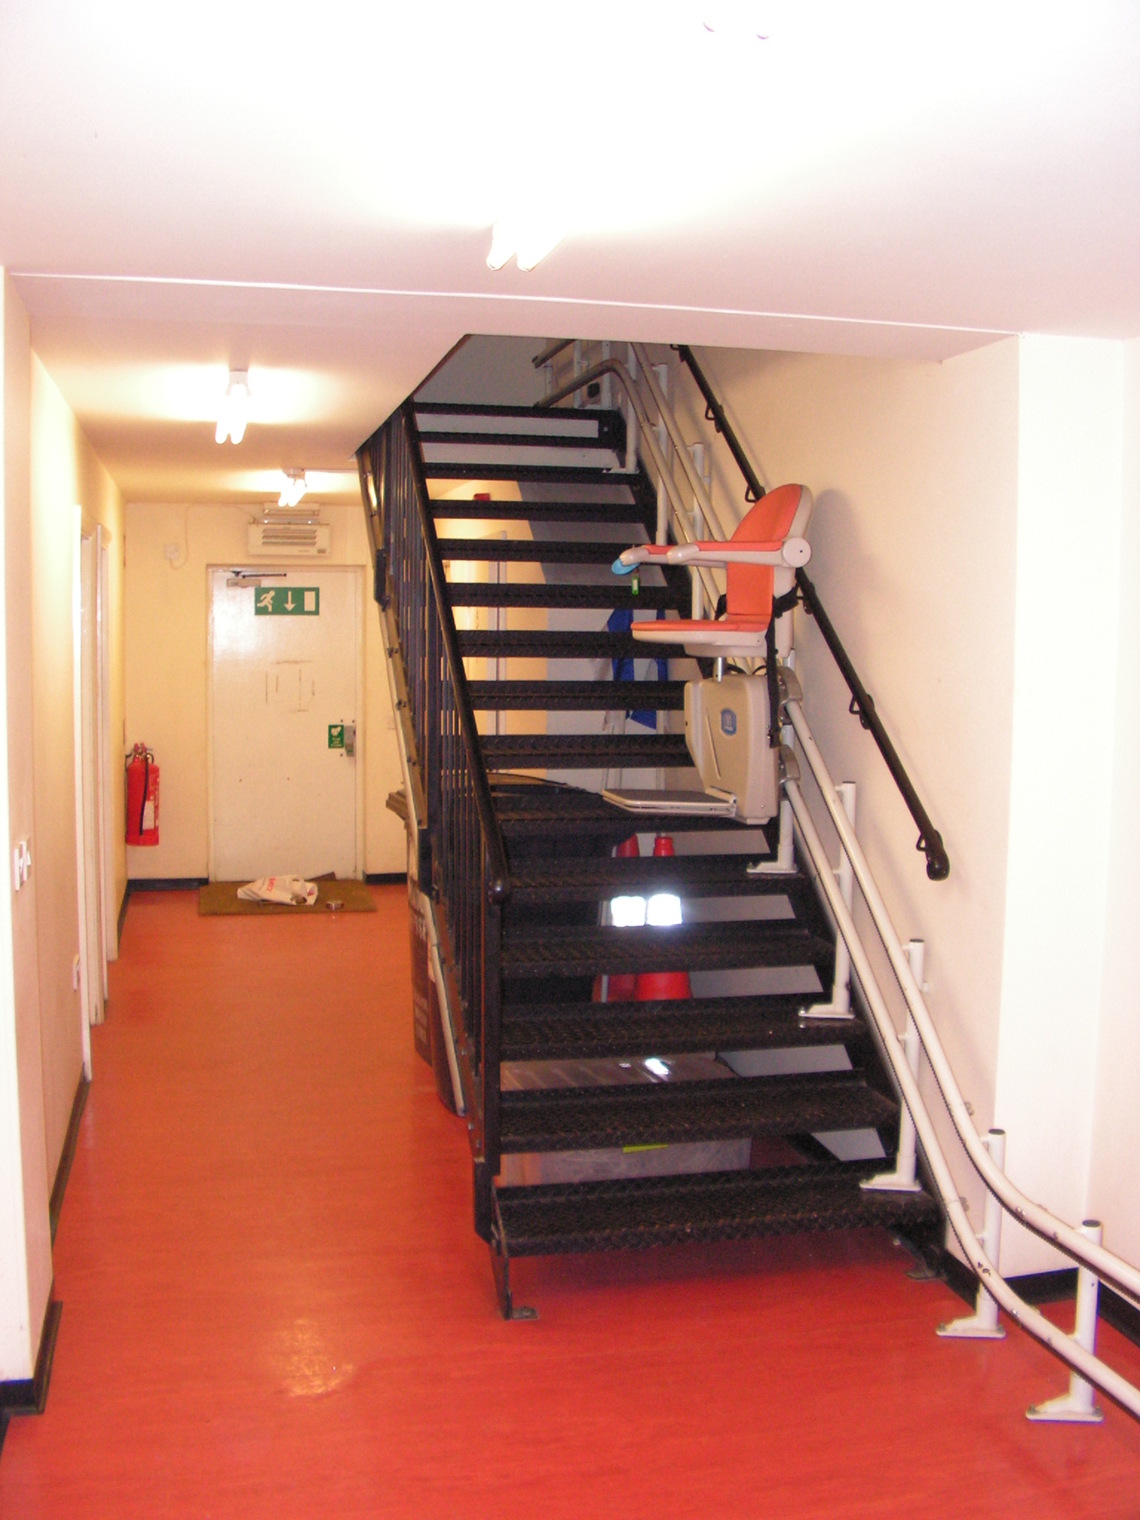 The stairs with the stair-lift half way